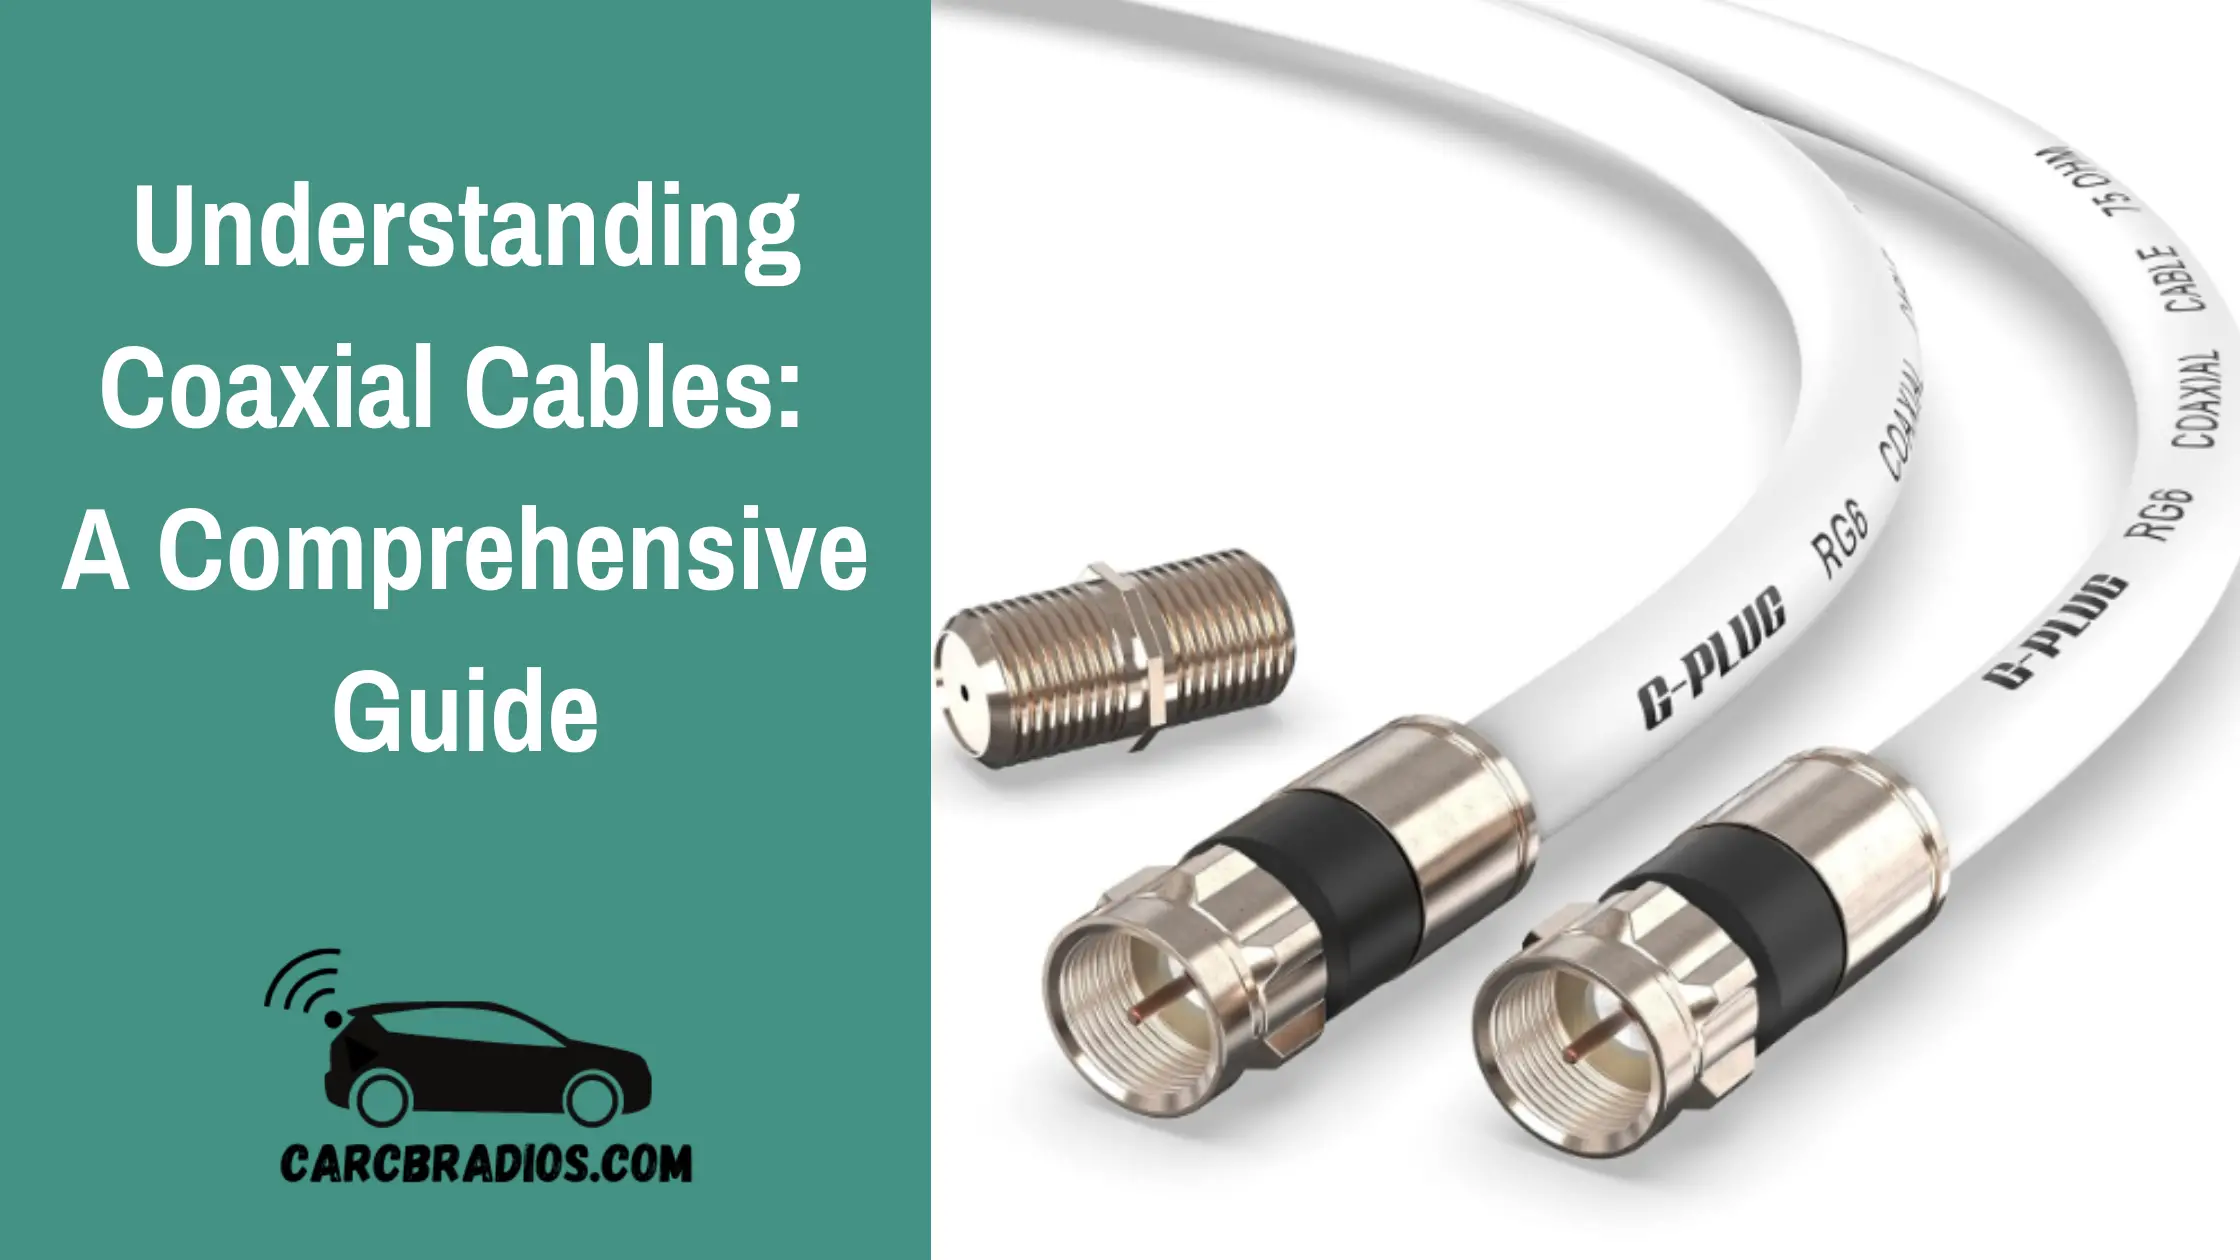 Coaxial cable is an electrical transmission line that is used to transmit high-frequency signals with low signal loss. It has a wide range of applications, including phone lines, cable TV, internet, and cell boosters. Coaxial cables come in different sizes and lengths, each designed for specific uses.